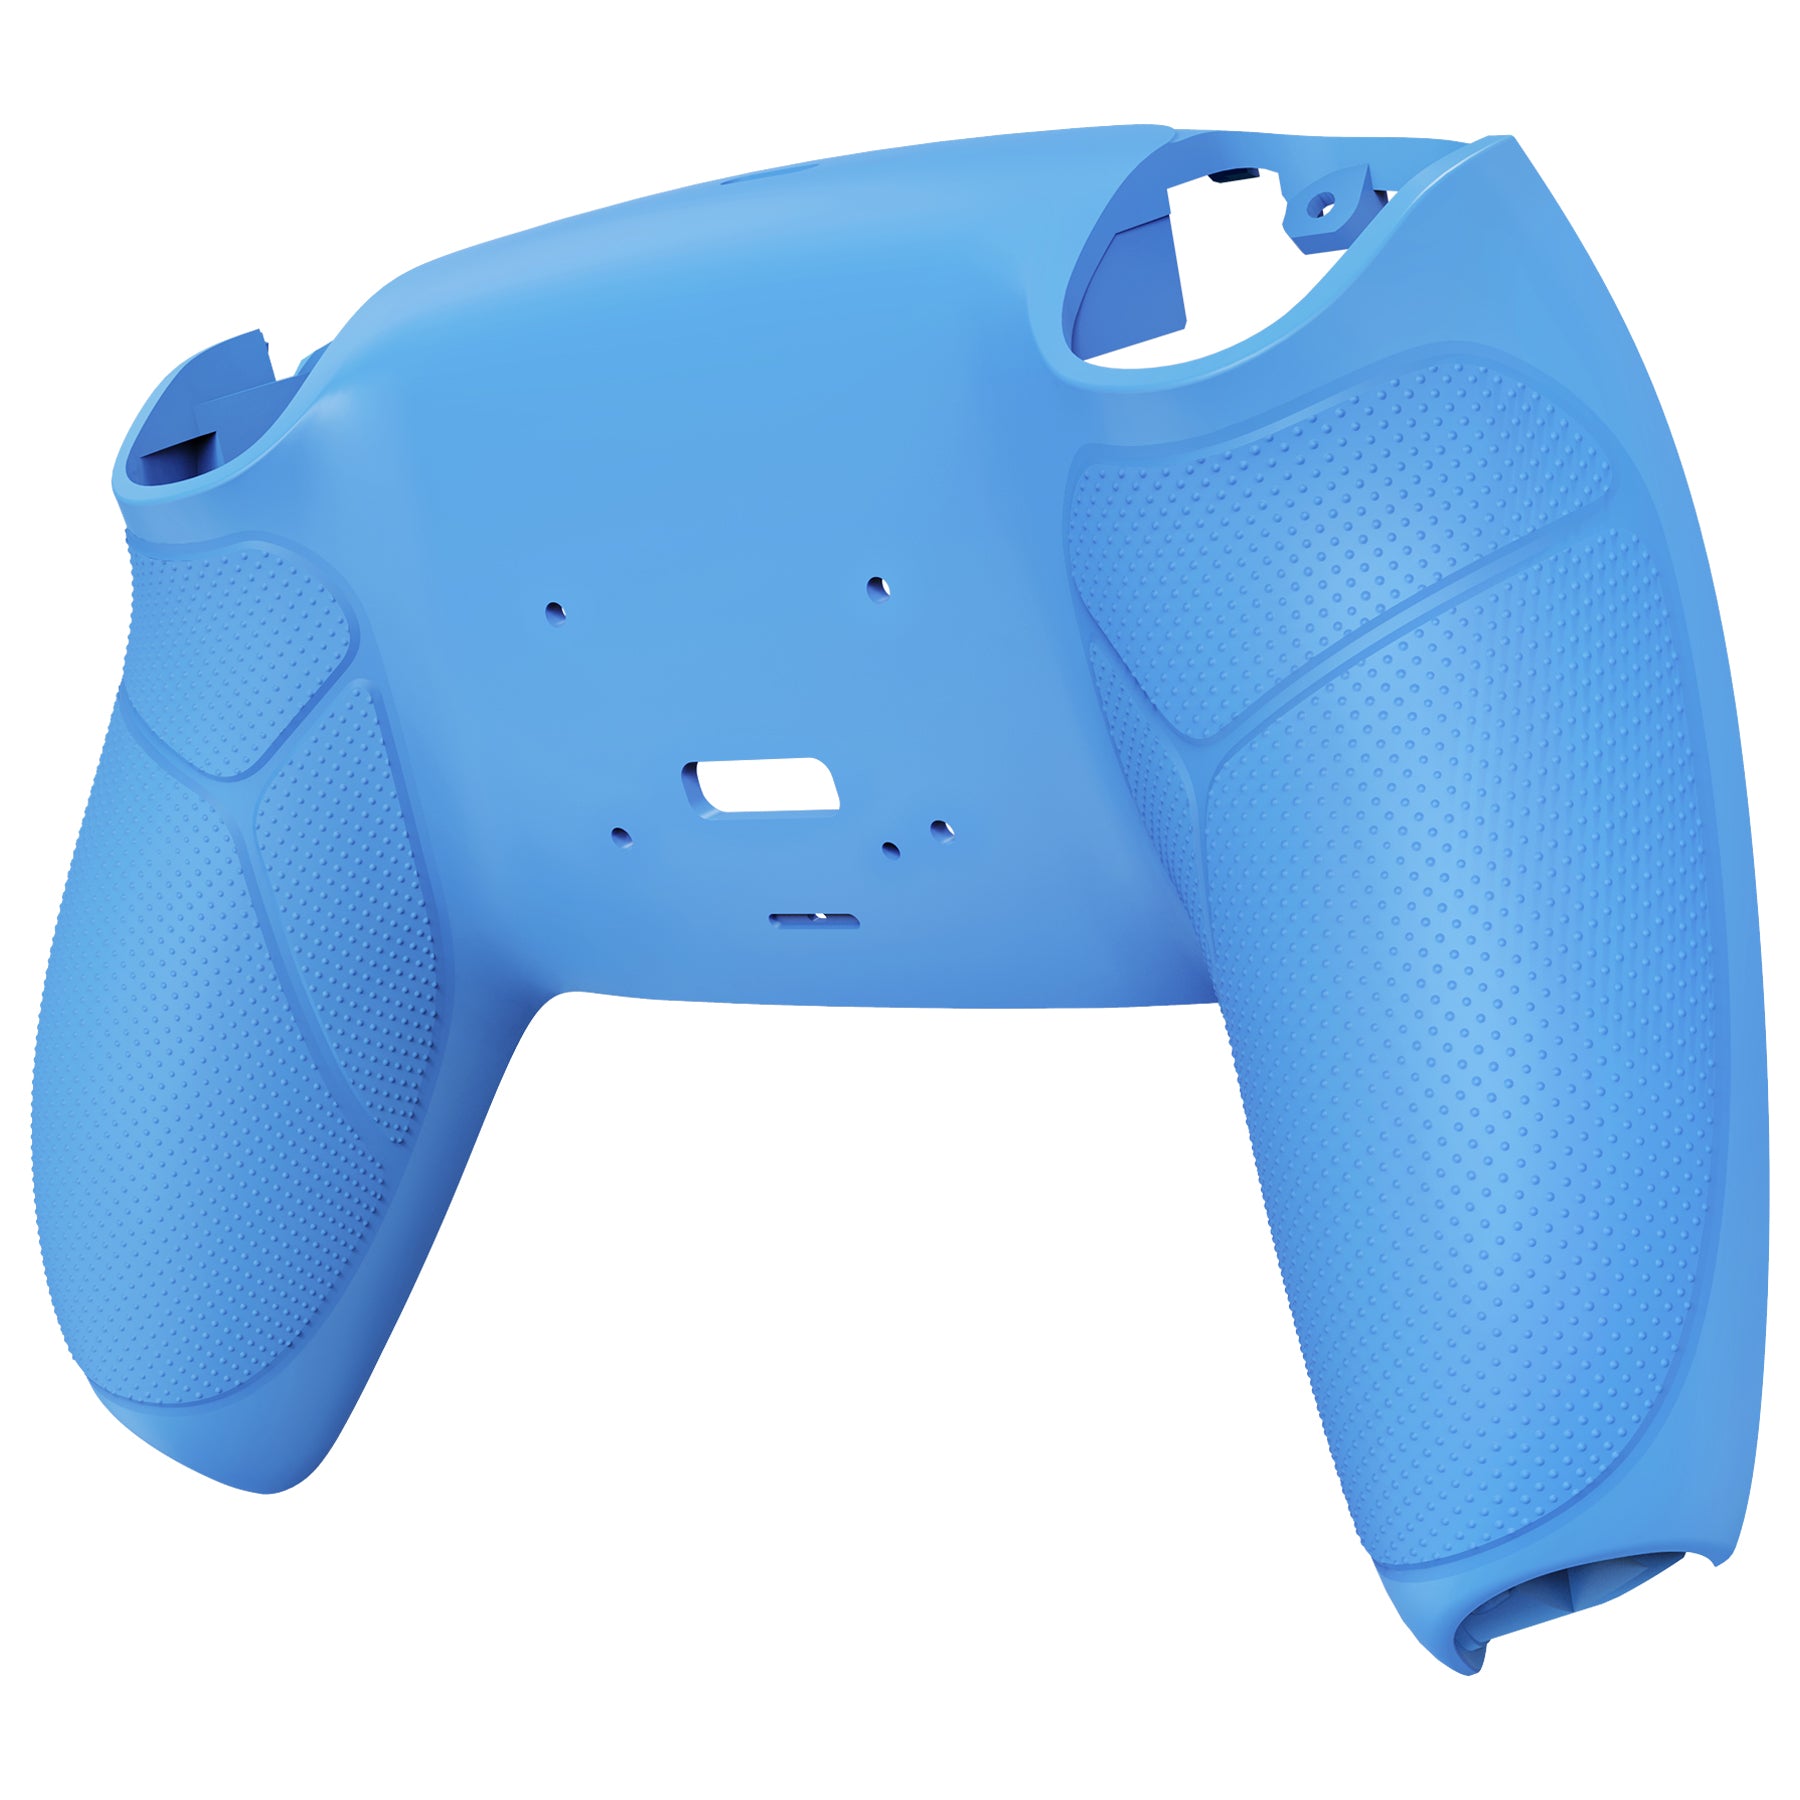 SONY STARLIGHT BLUE PS5 REMAPPABLE METAL PADDLES RMB 2.0 BACK GRIP  CONTROLLER